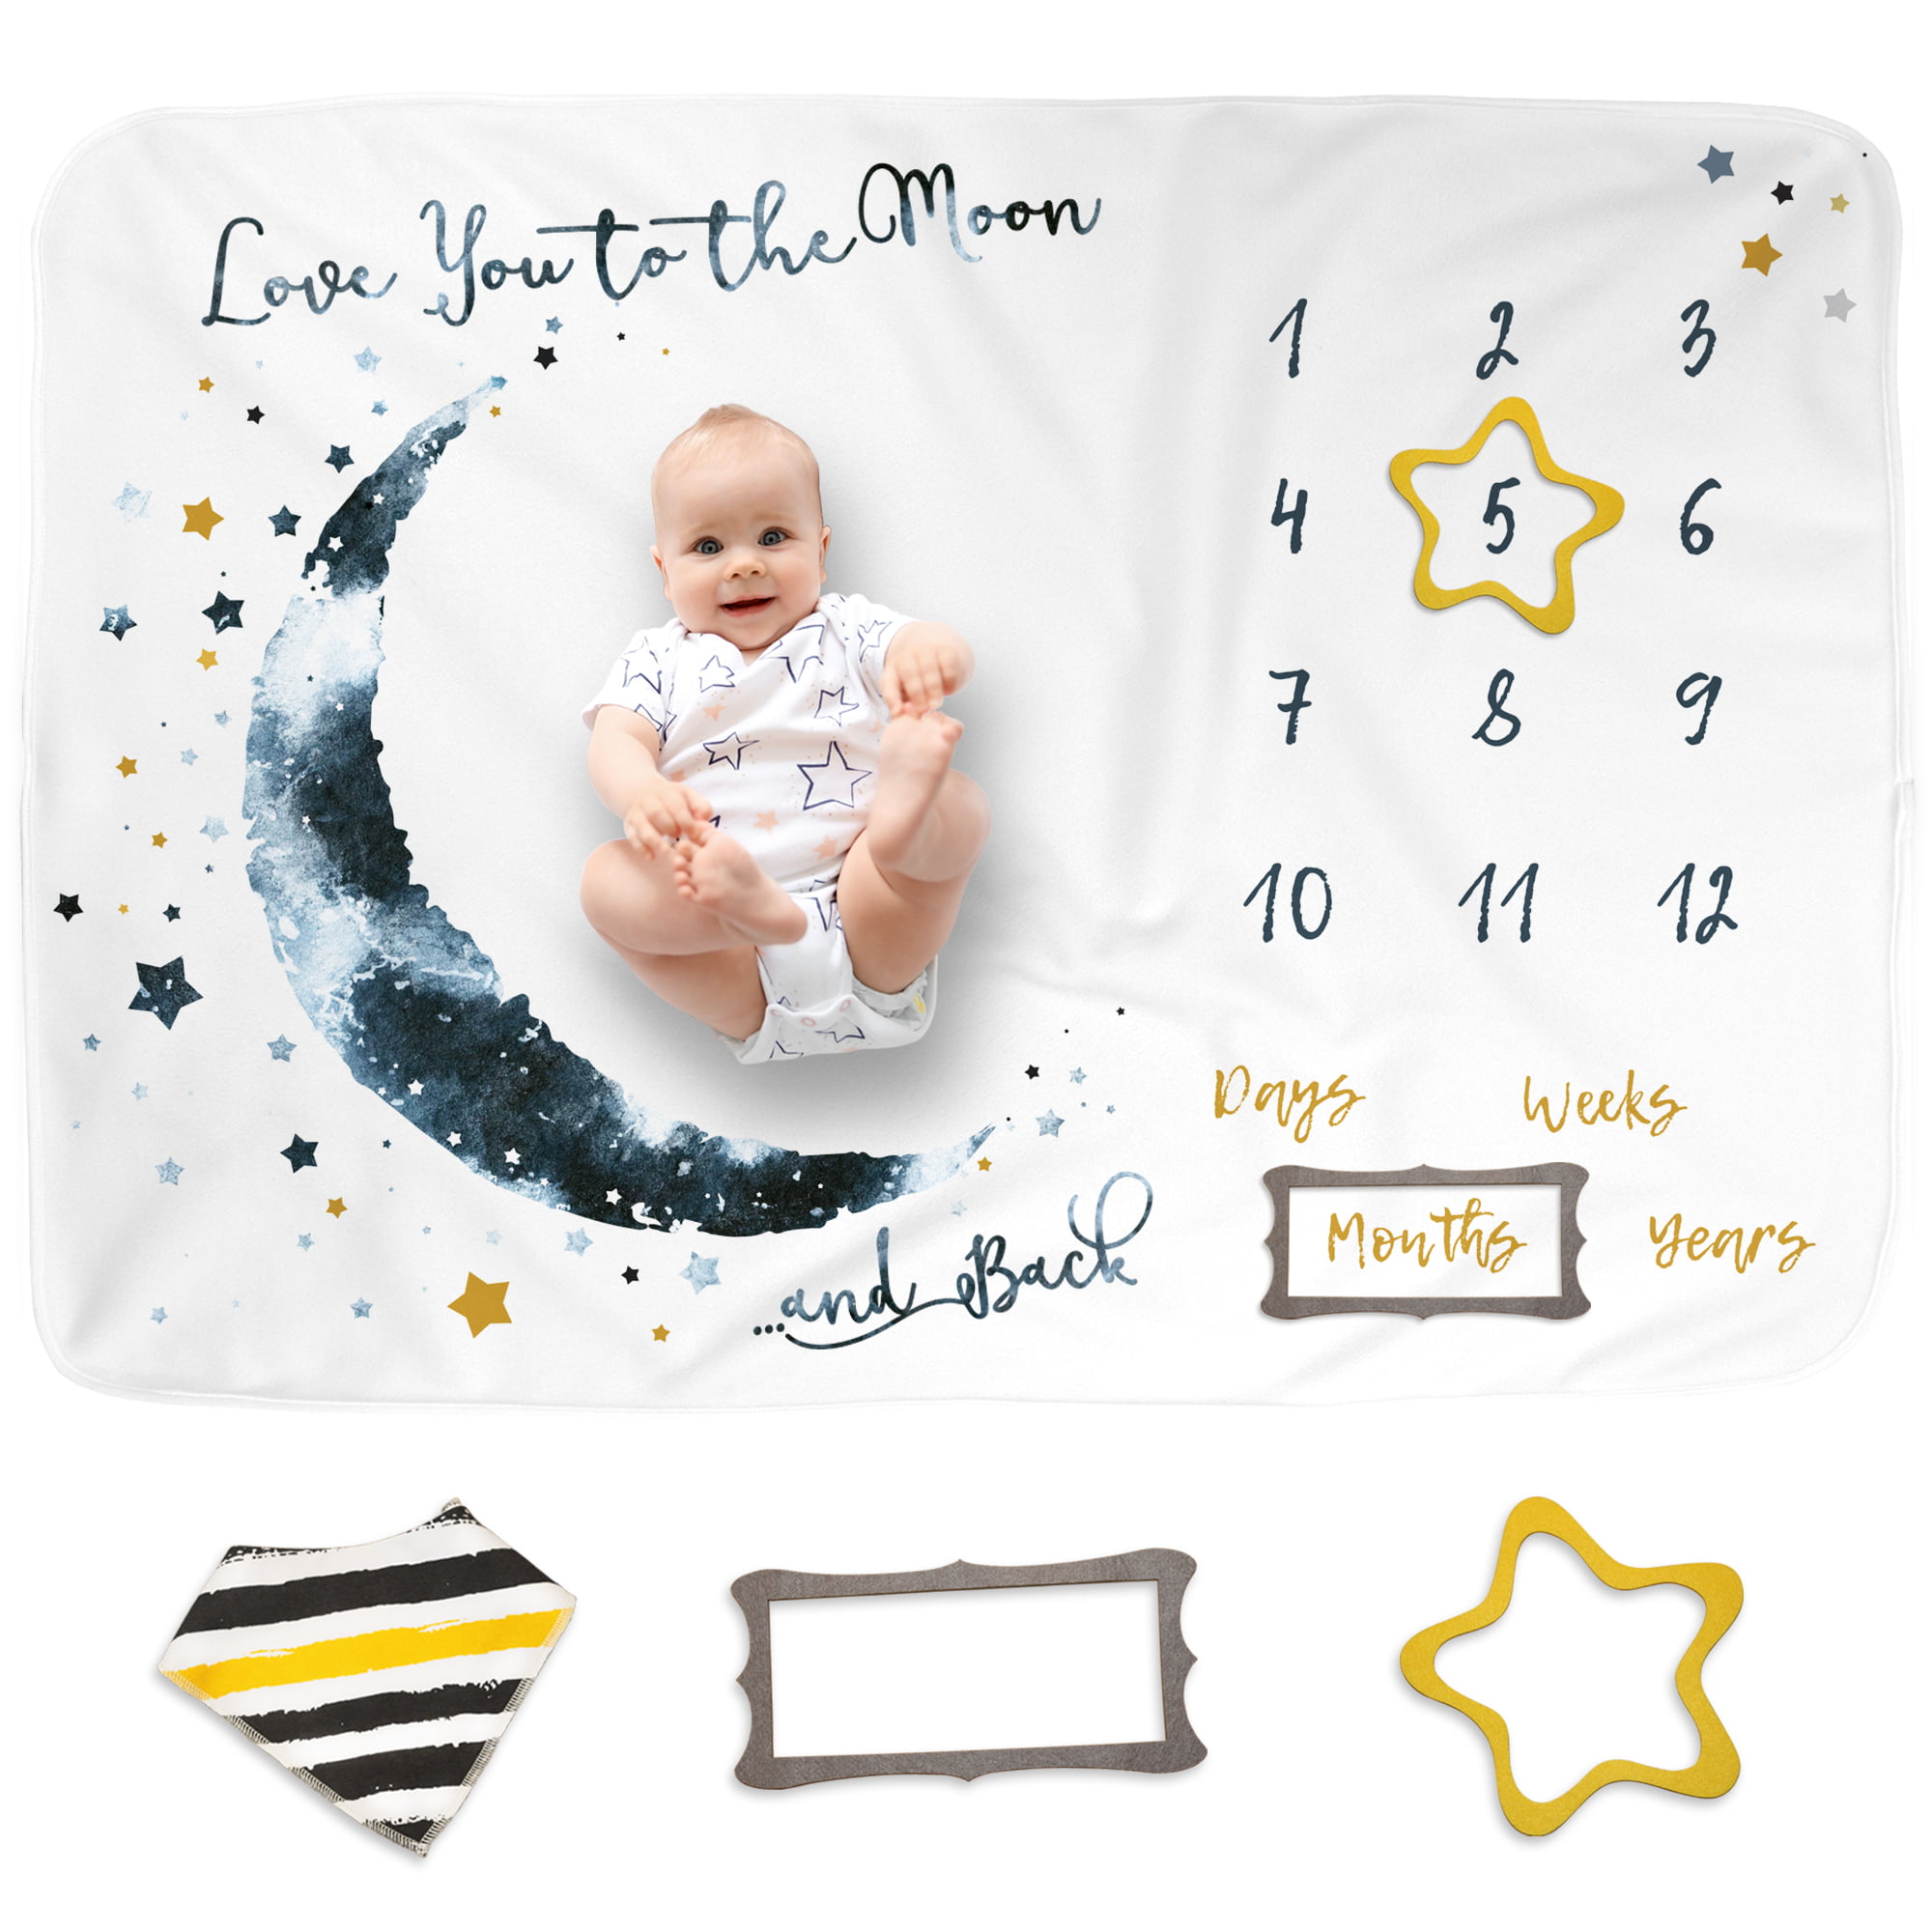 Baby Chart Blanket Photography Backdrop Included 12 Stickers 50 × 40 Shower Gift Soft Flannel Nap Mat Decoroca Dinosaur Baby Monthly Milestone Blanket Newborn Blankets for 1 to 12 Months Boys